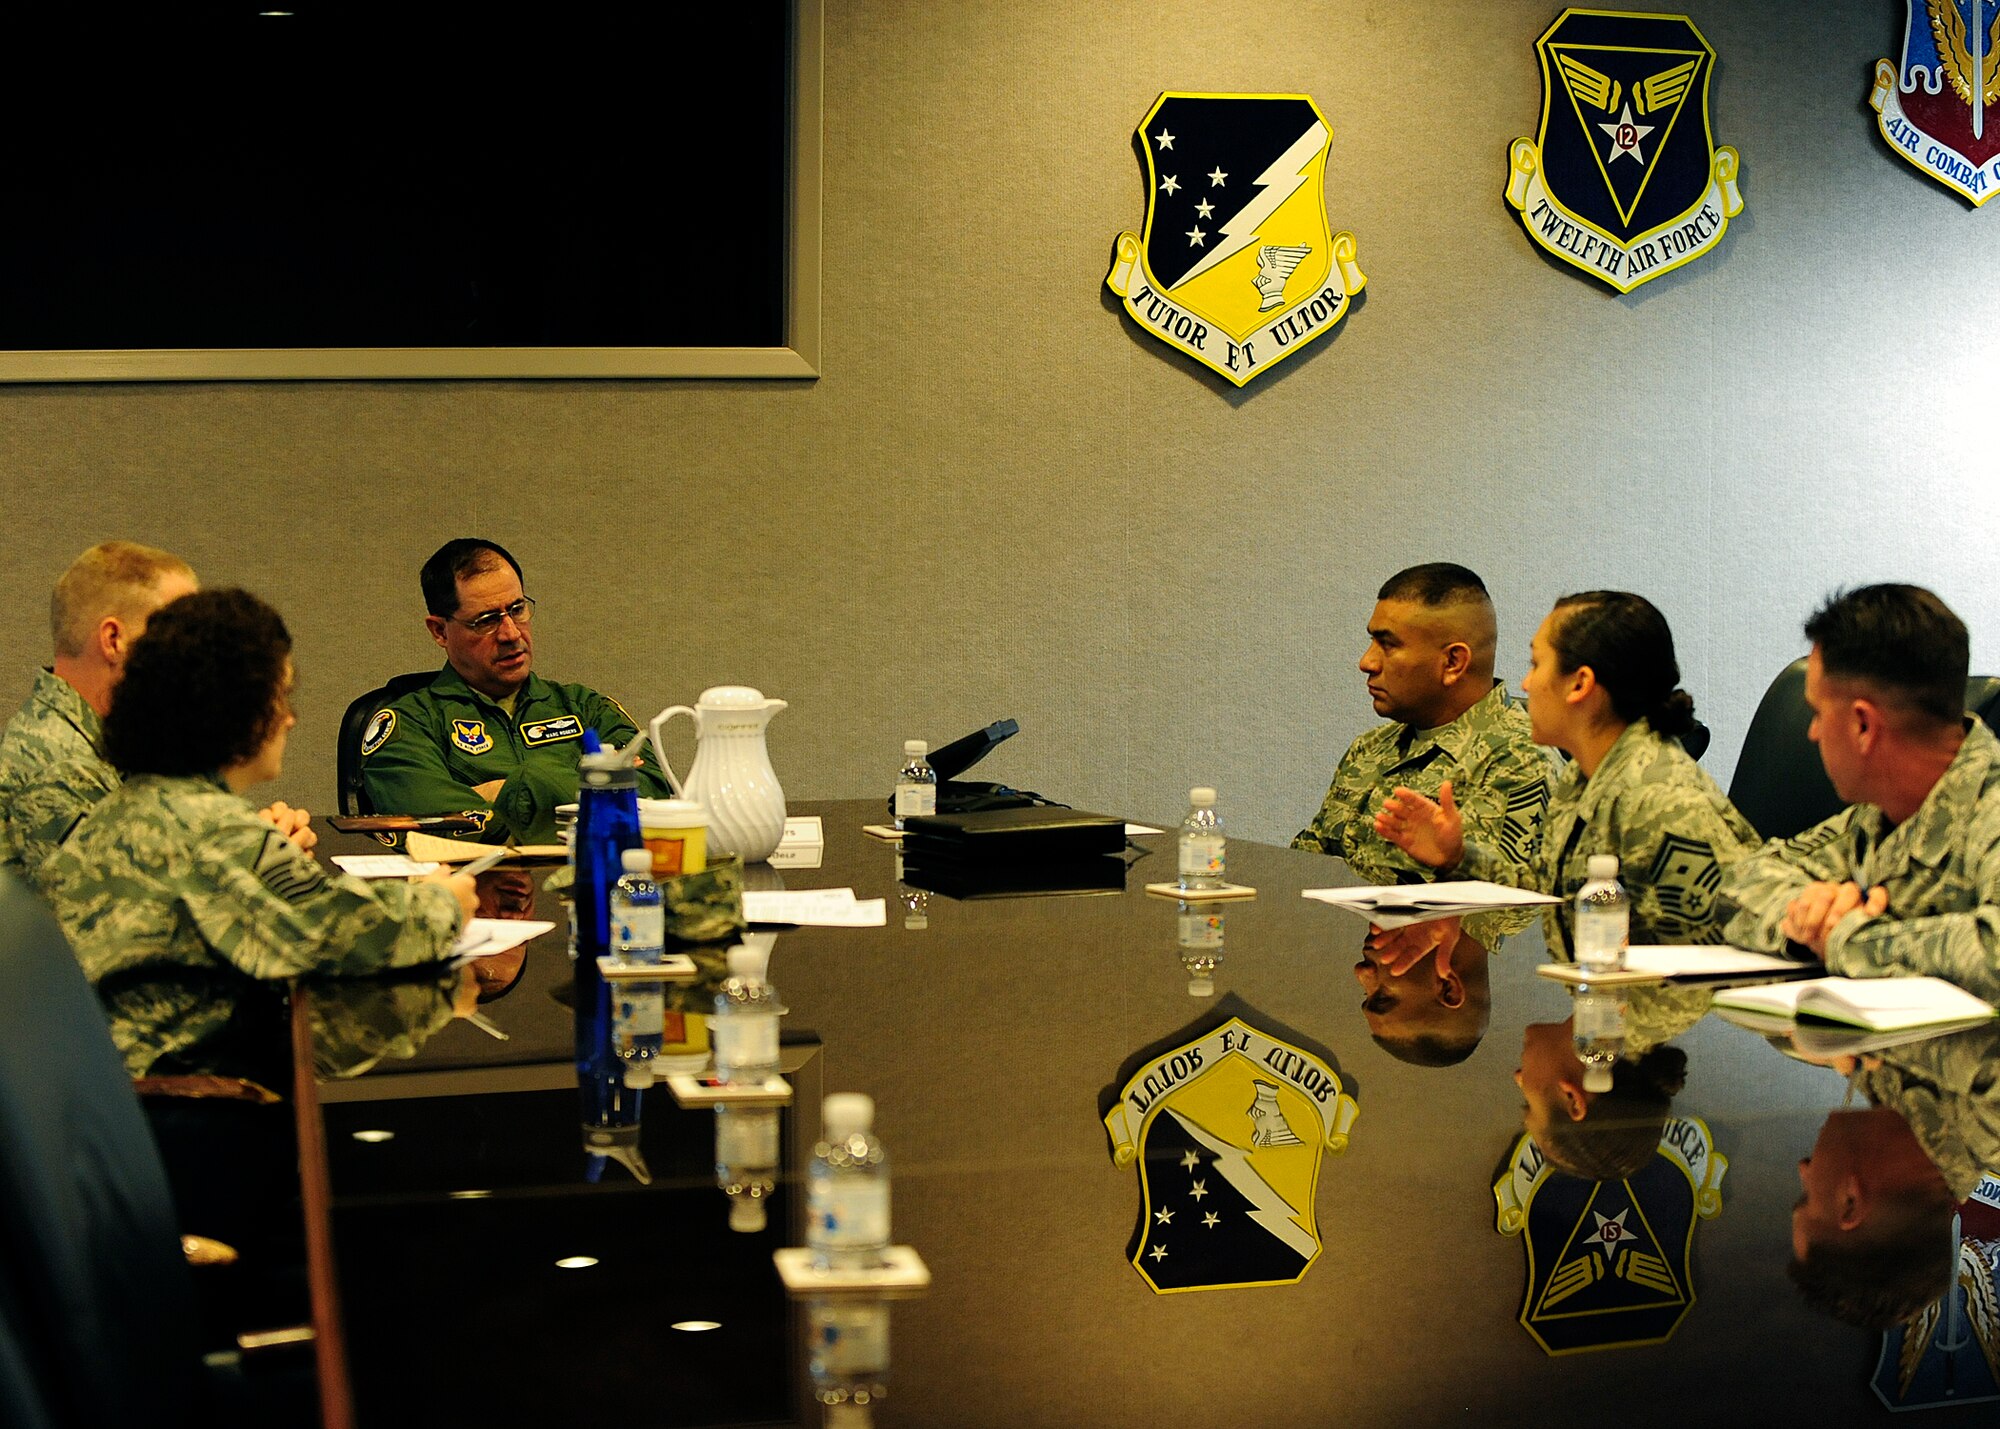 HOLOMAN AIR FORCE BASE, N.M. -- Lt. Gen. Marc Rogers, U.S. Air Force Inspector General, meets with the First Sergeants Council executive members, March 26, 2010, during his tour of the base. The Inspector General reports to the Secretary and Chief of Staff of the Air Force on matters concerning Air Force effectiveness, efficiency and the military discipline of active duty, Air Force Reserve and Air National Guard forces. (U.S. Air Force photo by Senior Airman DeAndre Curtiss)(Released) 